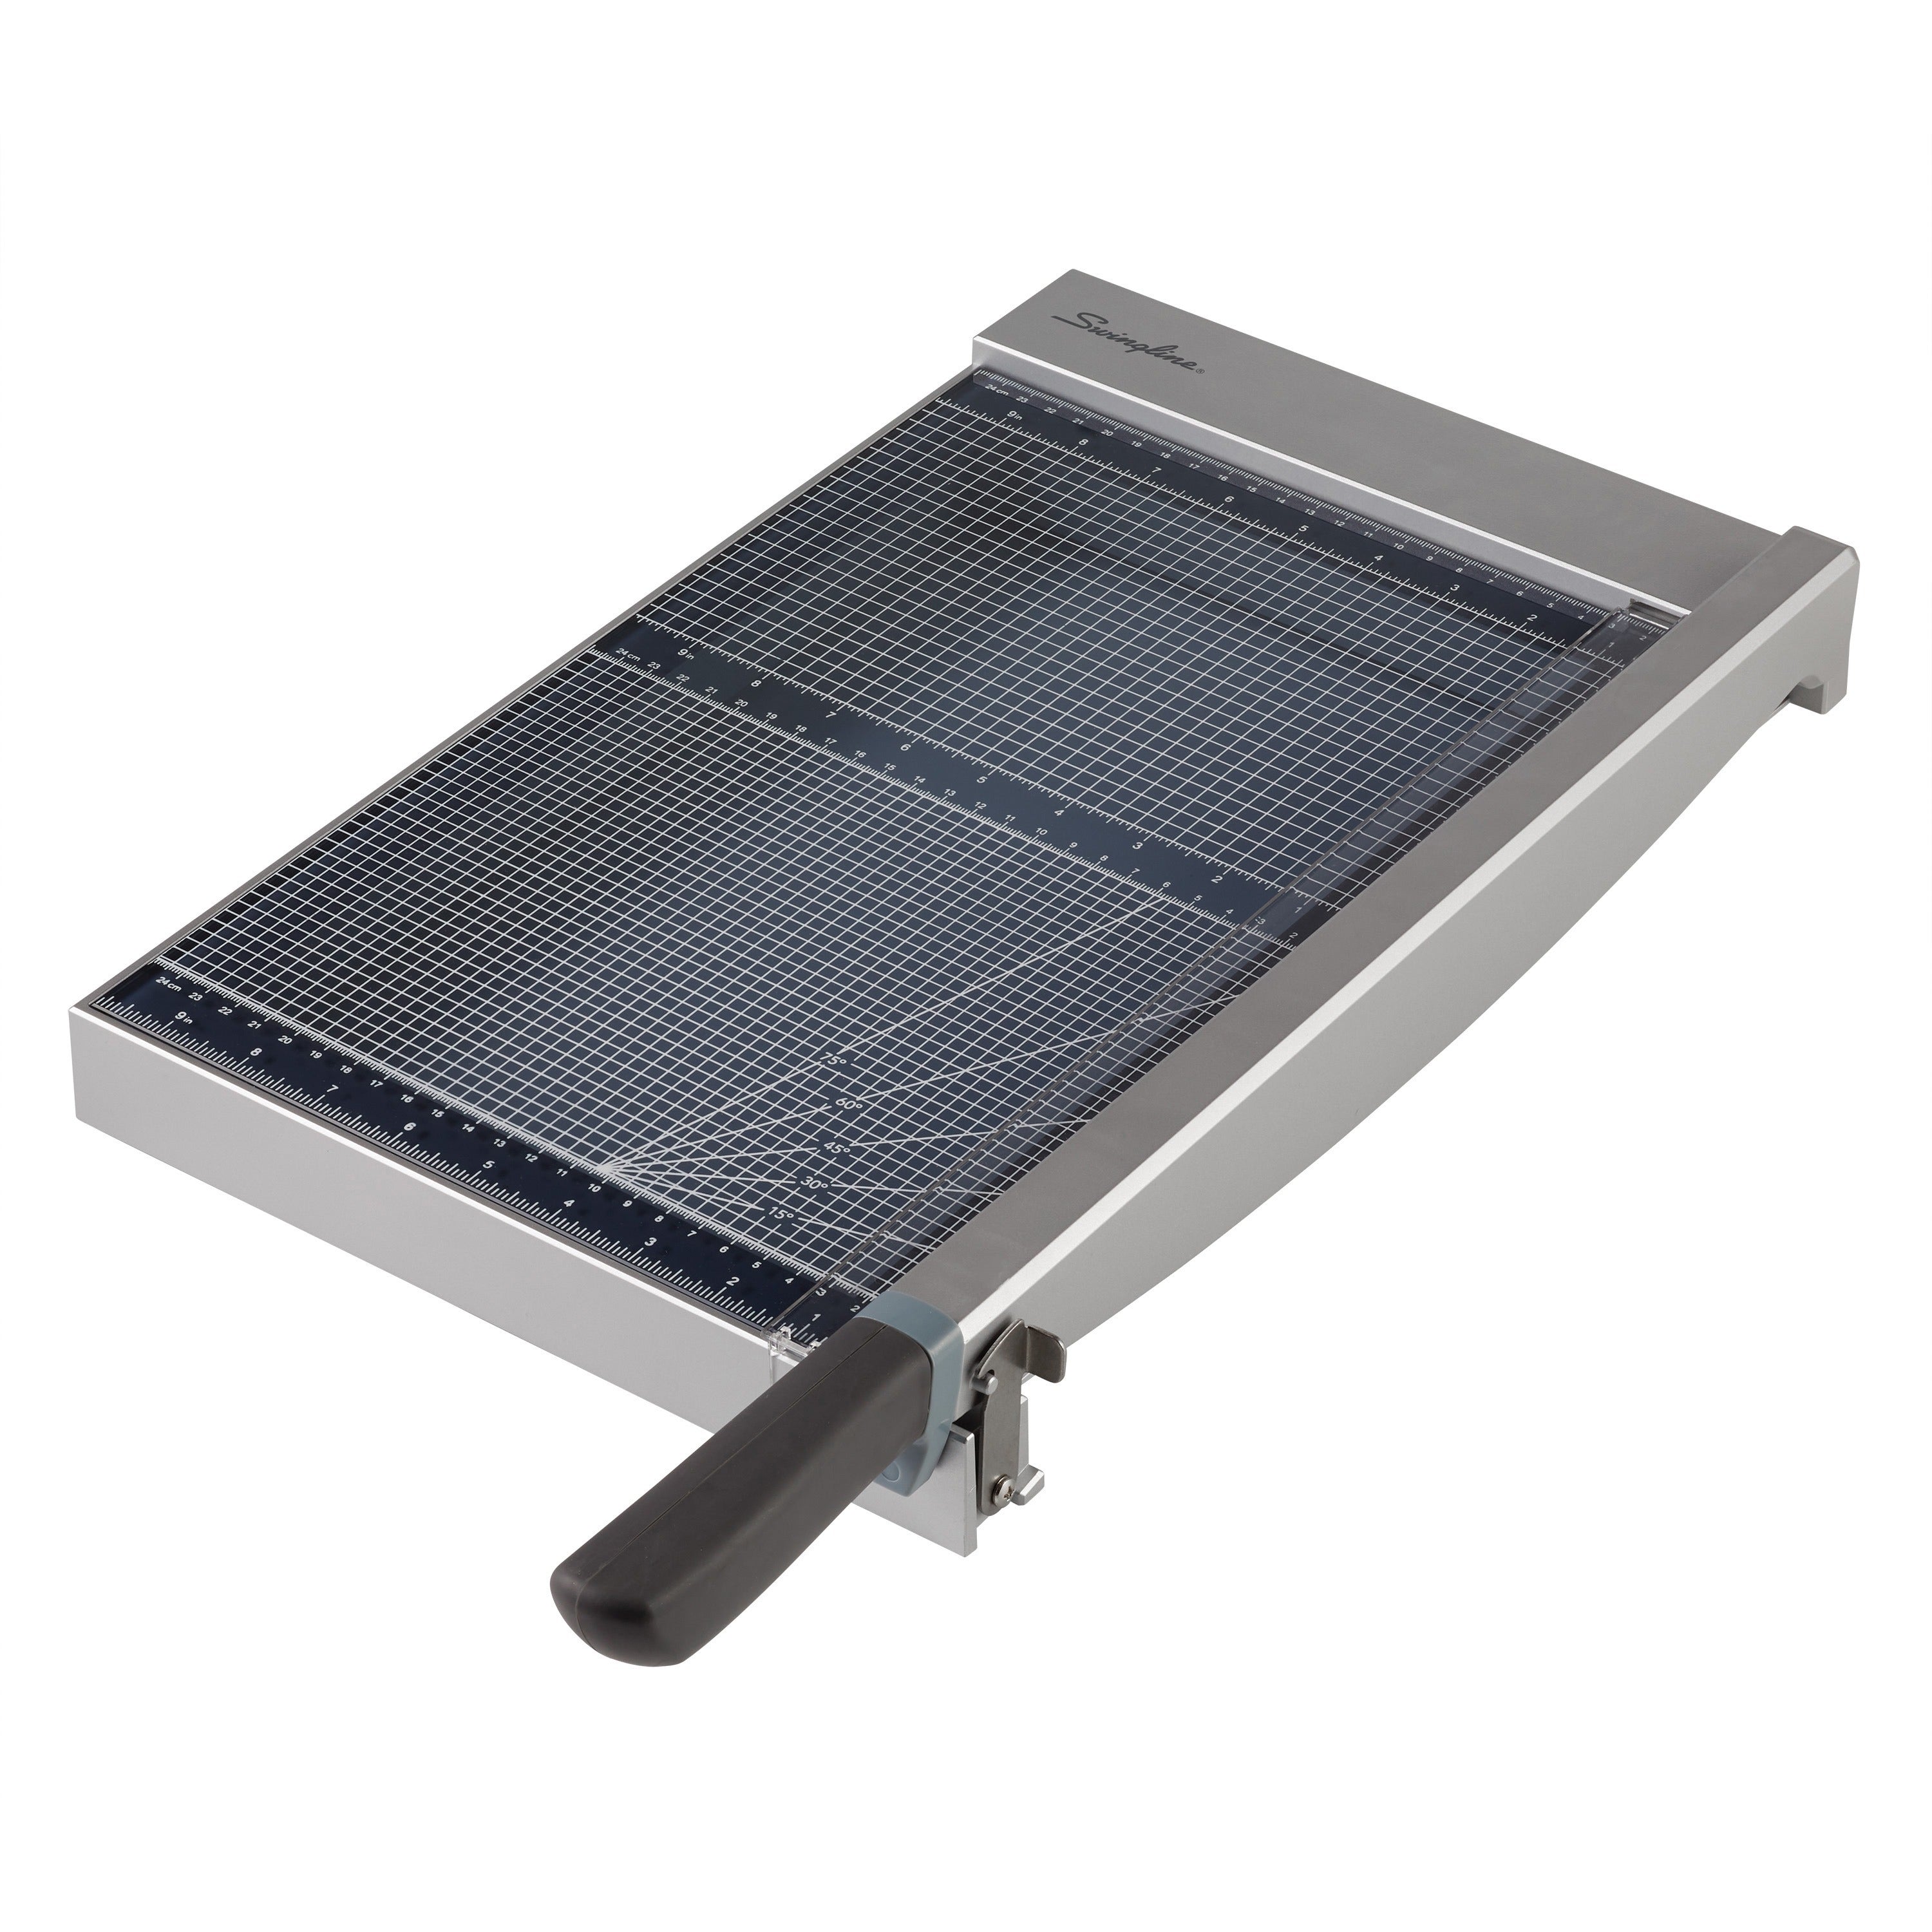 swingline-classiccut-guillotine-glass-trimmer-15-sheet-cutting-capacity-15-cutting-length-safety-latch-tempered-glass-gray-1-each_swi10014 - 2